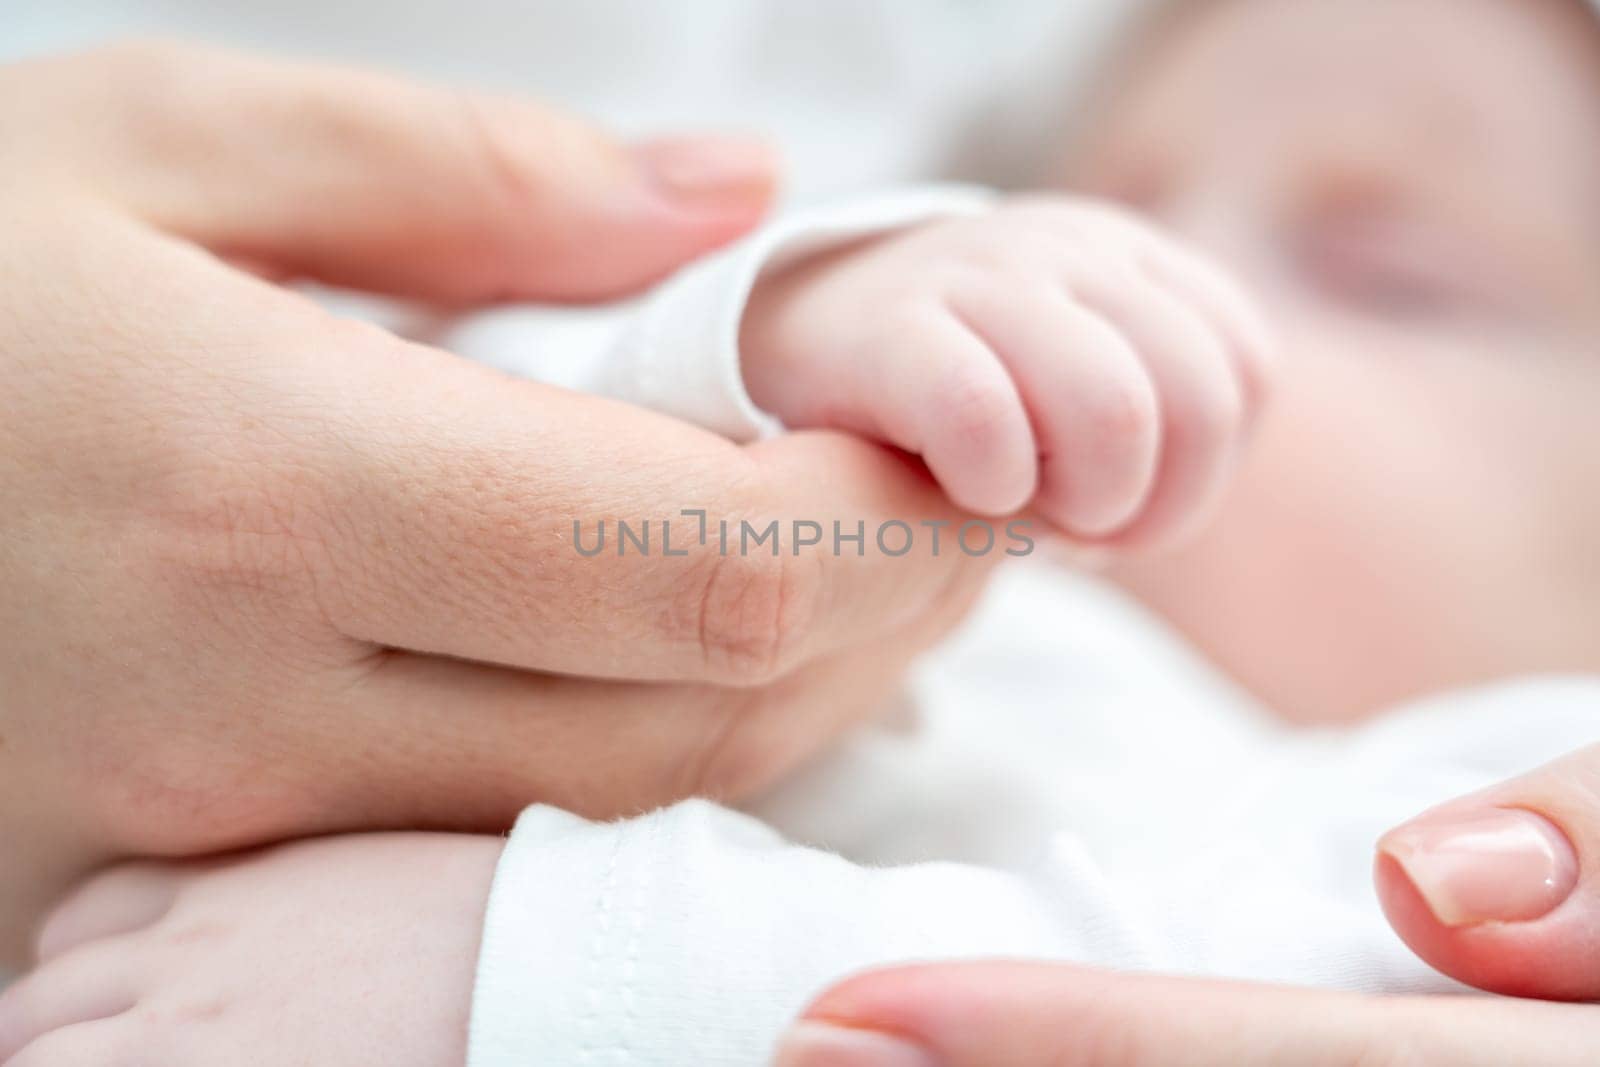 Serenity and love reflected in newborn's touch. Concept of the unspoken bond between mother and baby by Mariakray